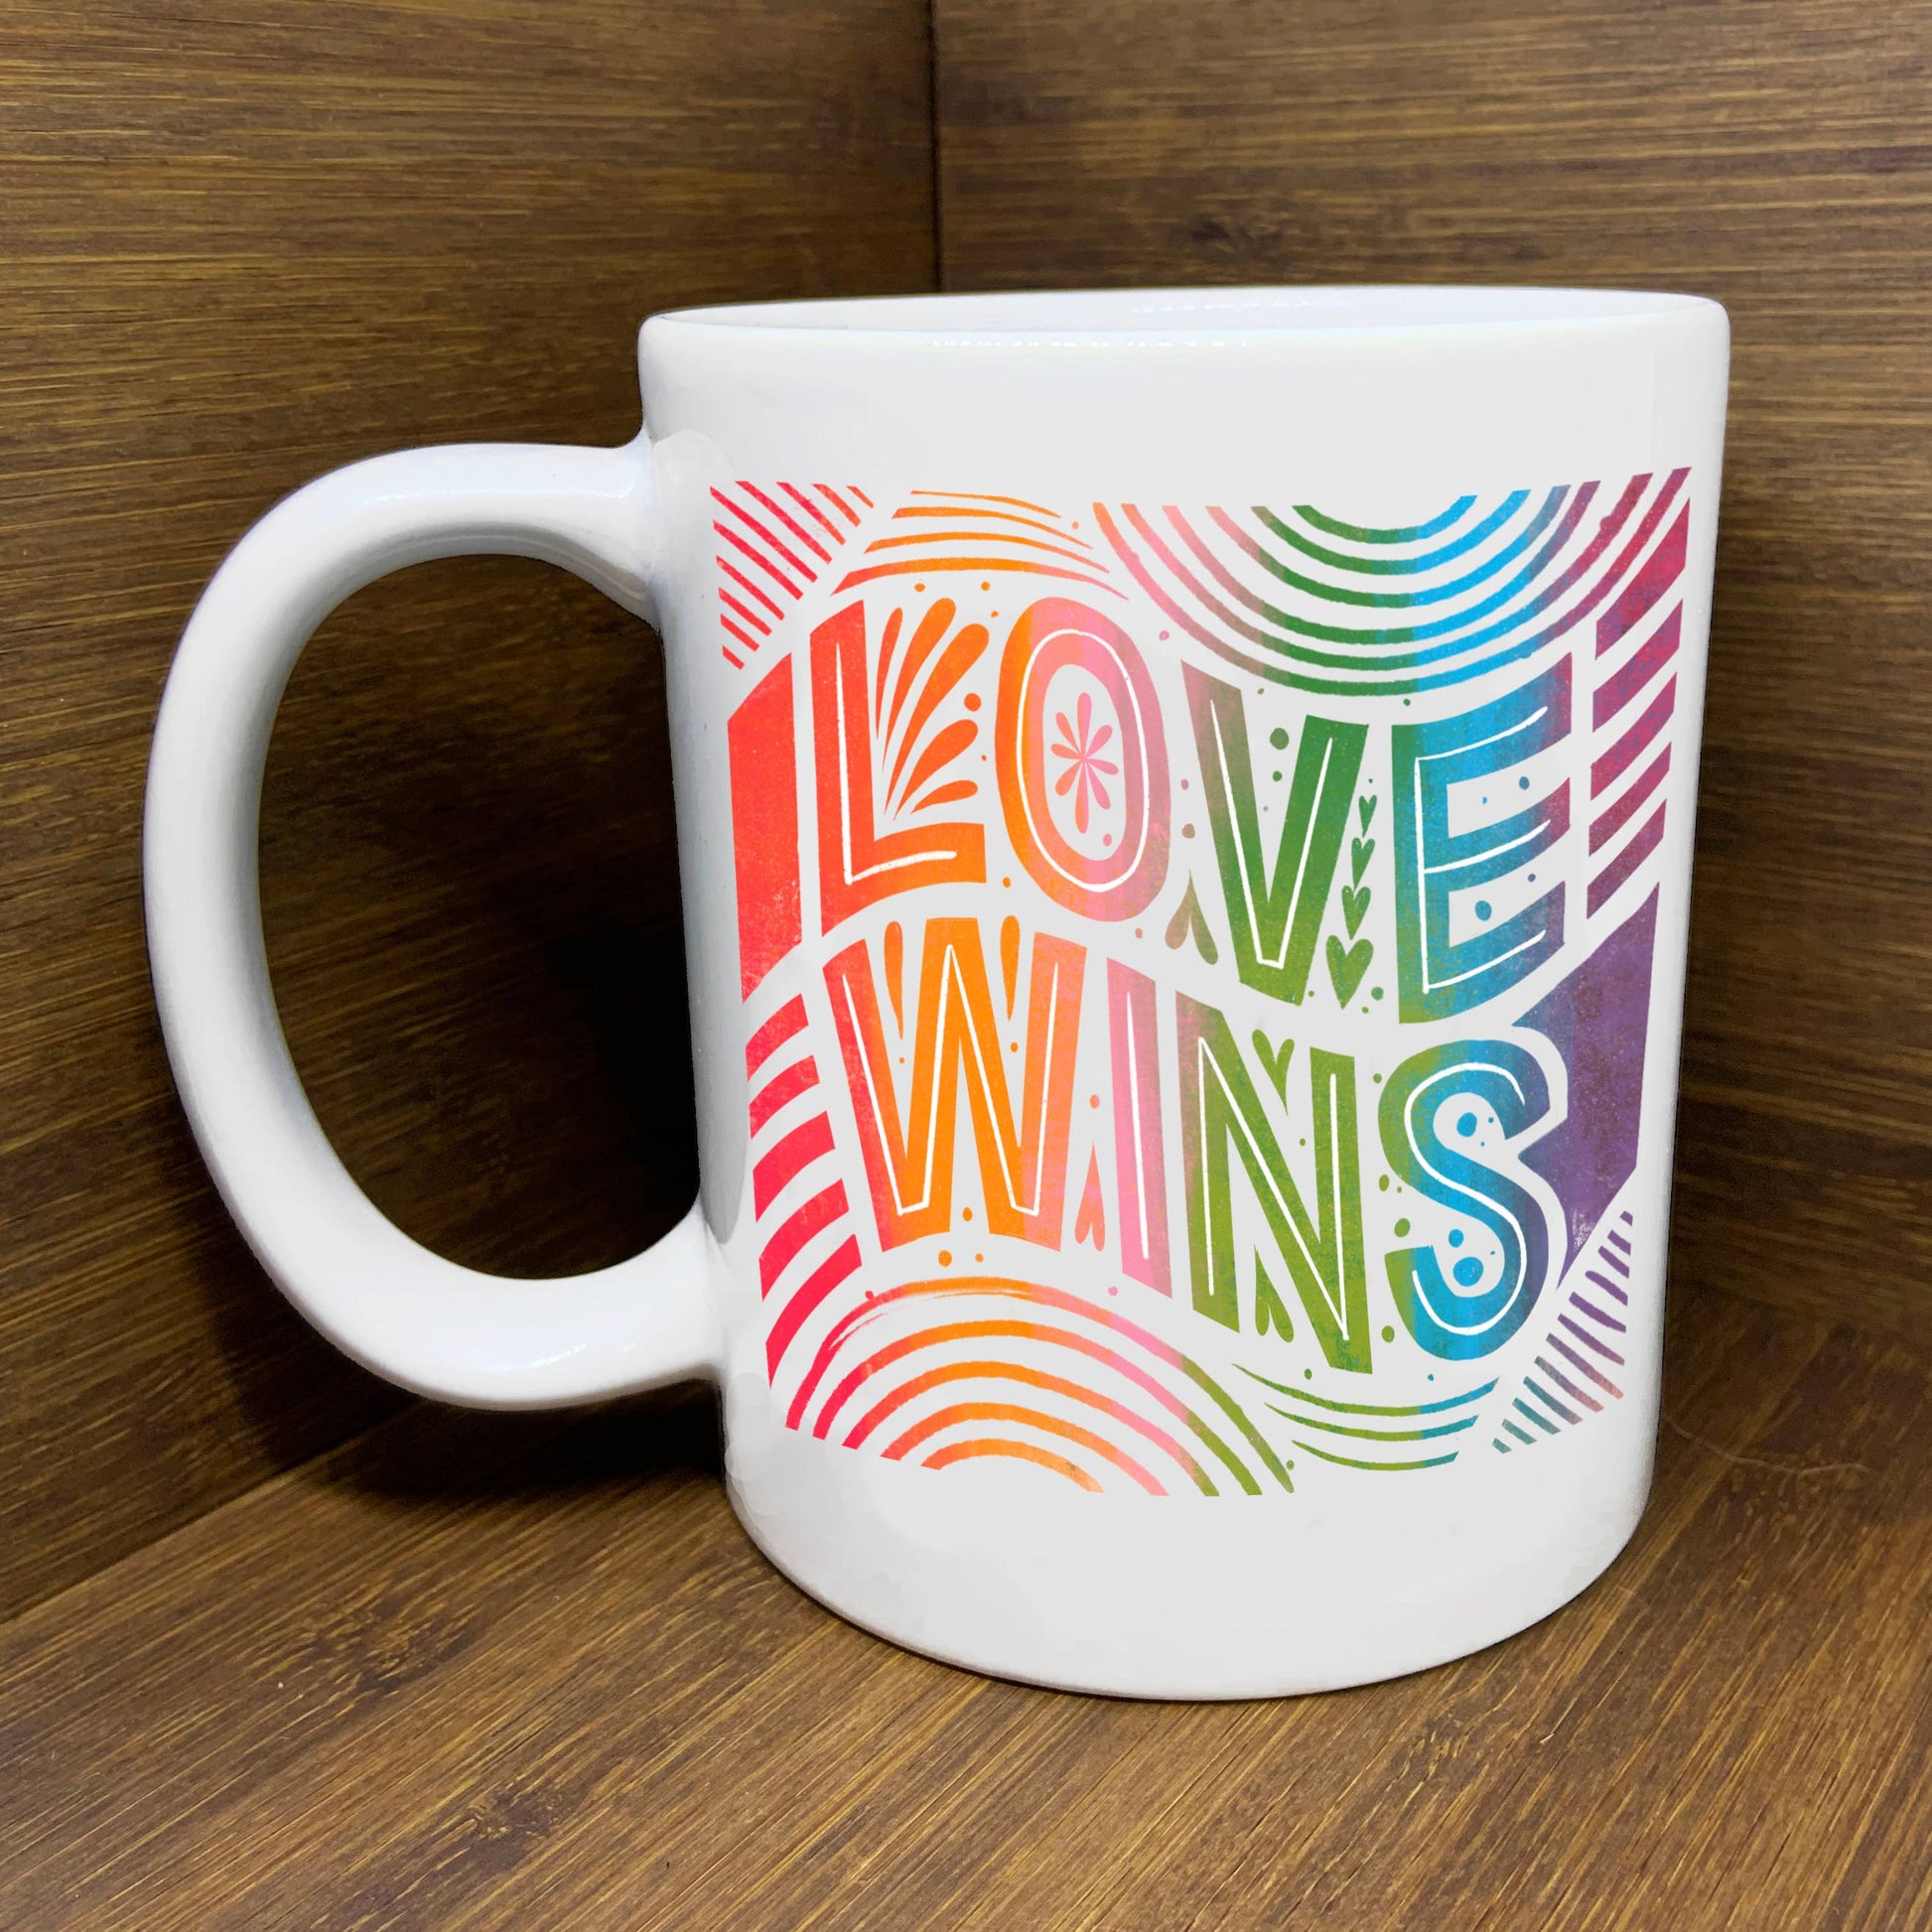 Love Wins mug with rainbow ombre art displayed on a wooden surface